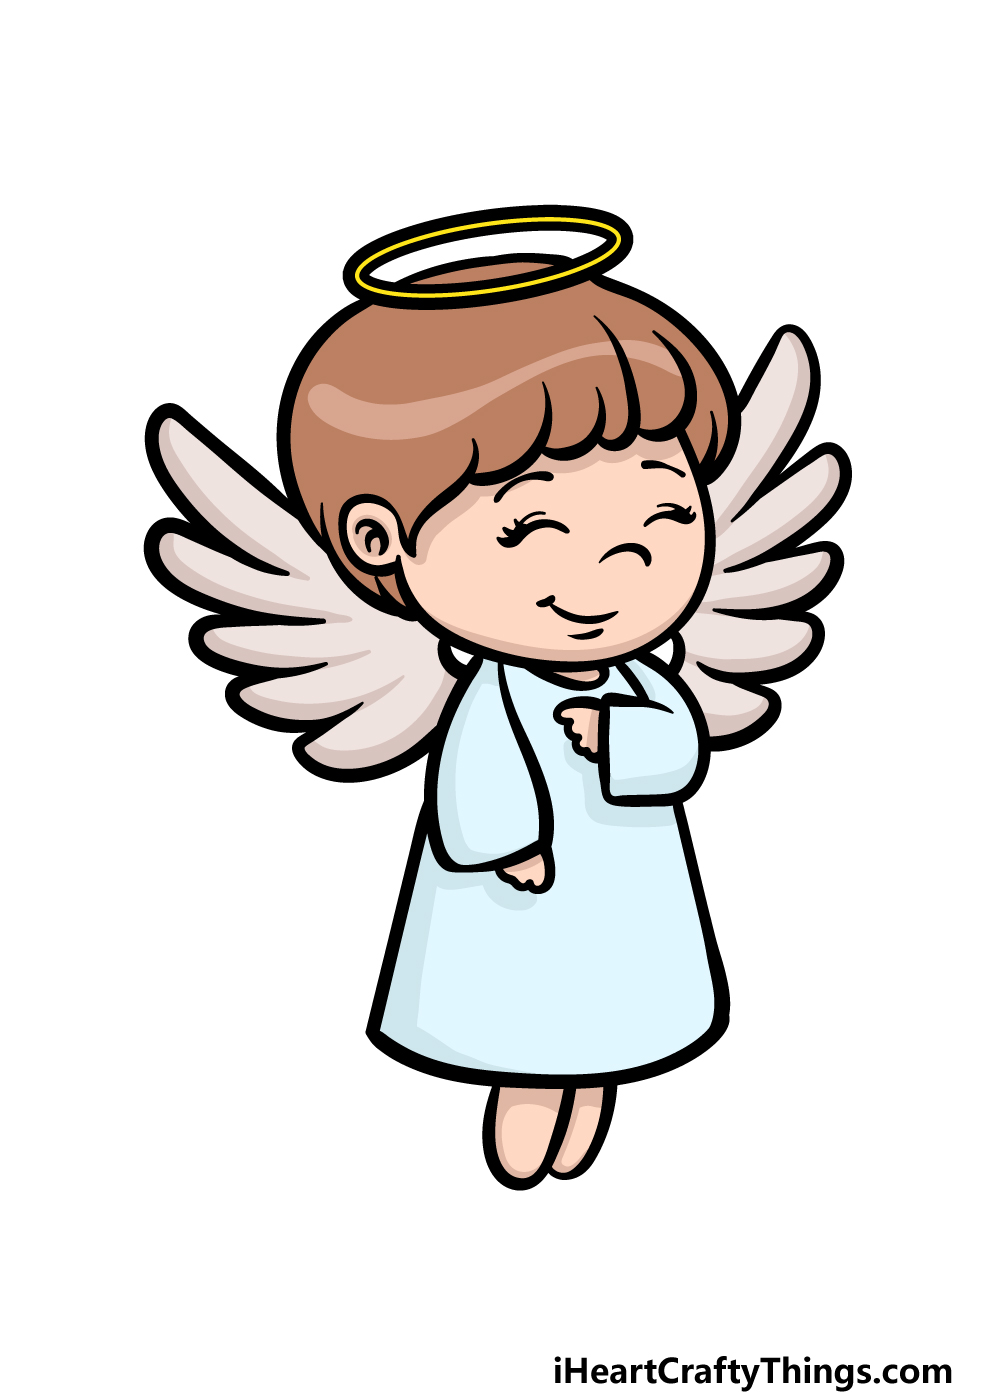 arianit vokshi recommends how to draw cartoon angel pic